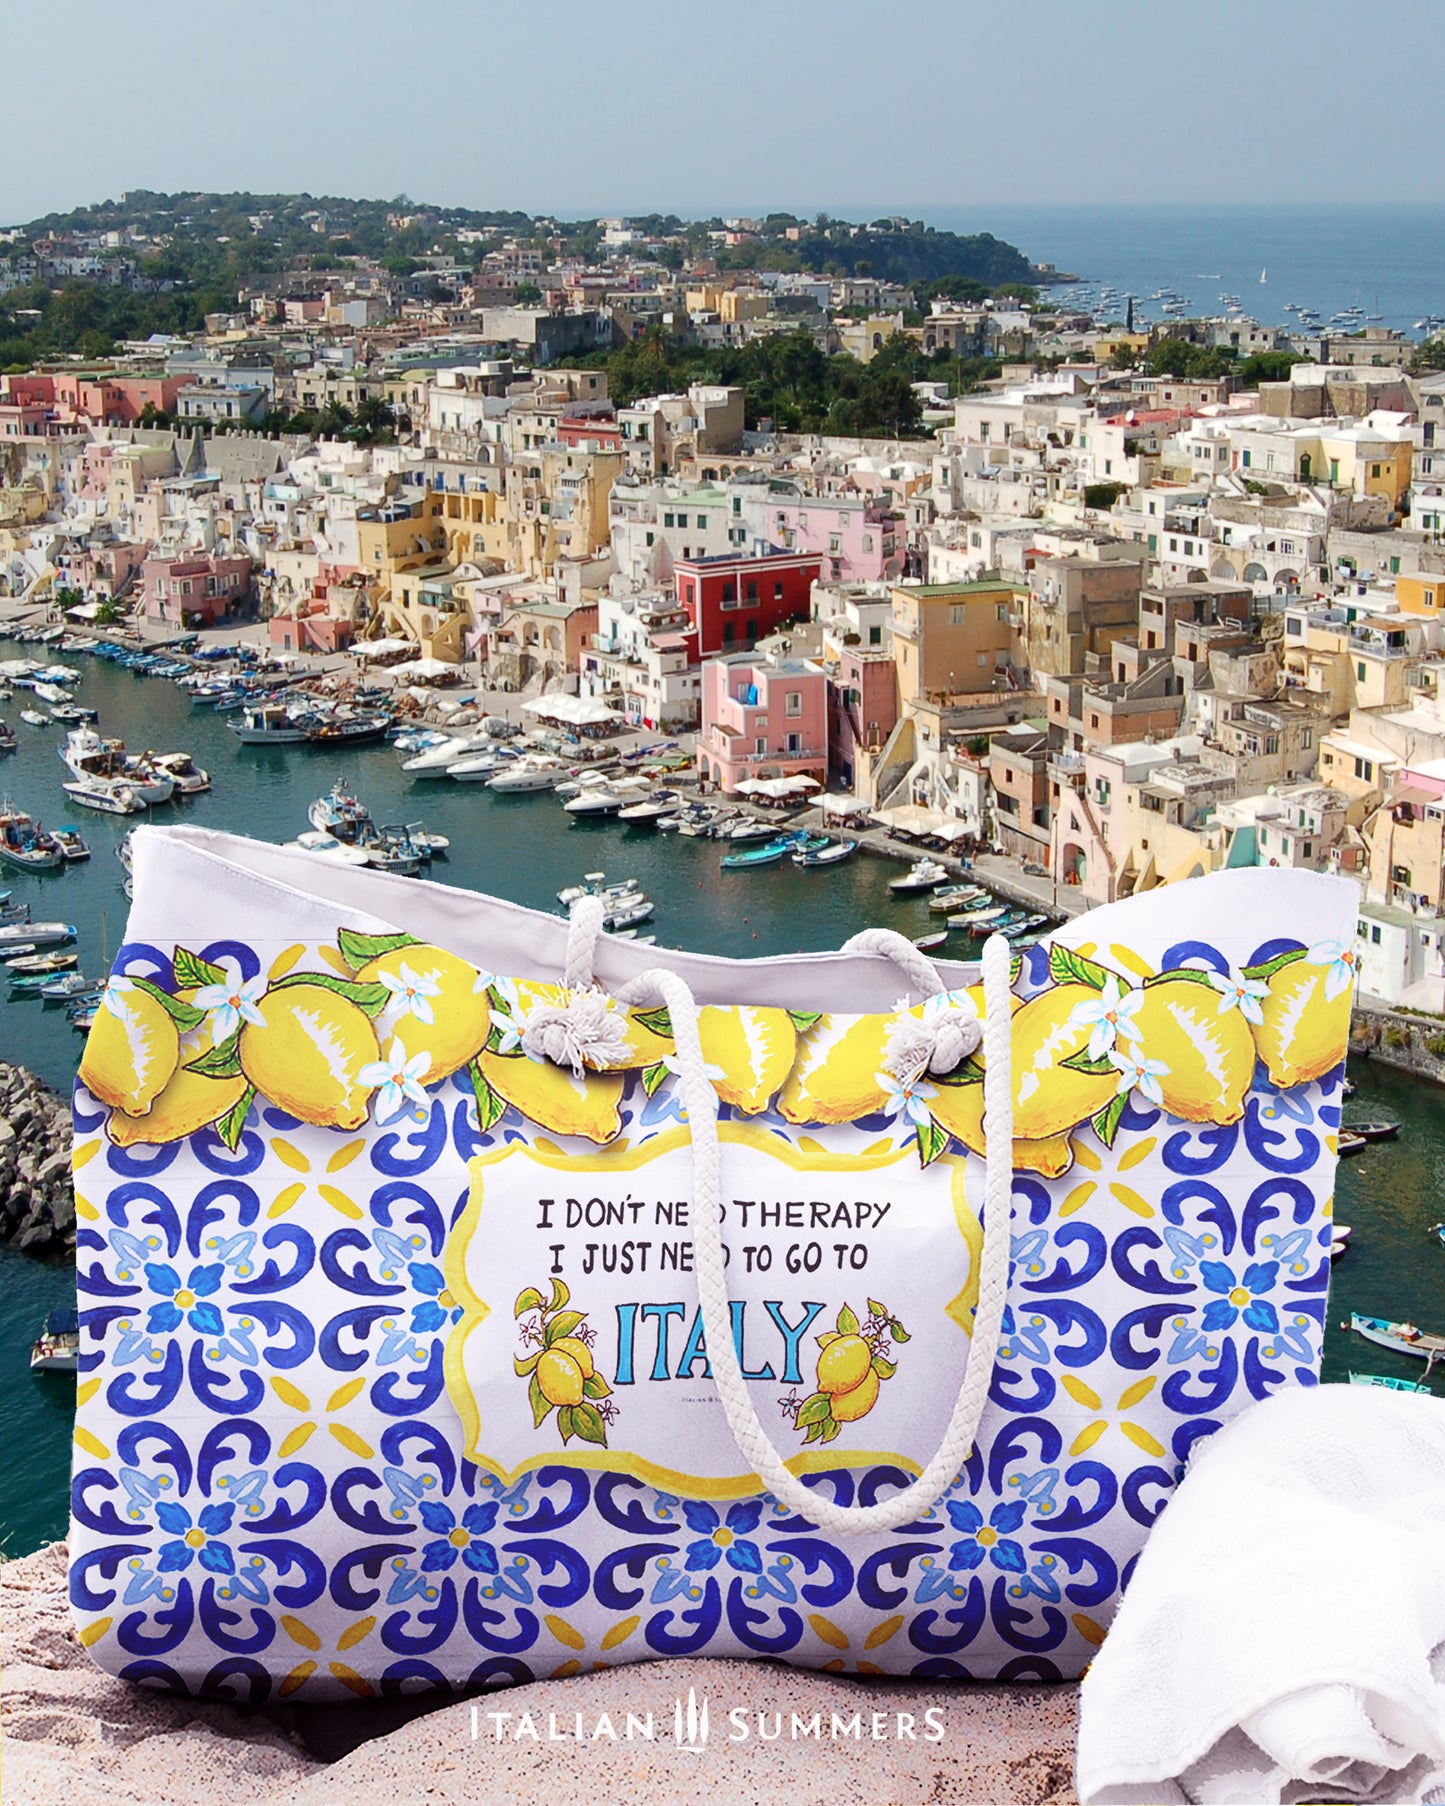 Italy inspired beach bag large model. It has the quote I don't need therapy, I just need to go to Italy. Next to the Italy writing a big Amalfi Coast lemons. The whole bag is printed with Italian tiles, colors blue with some yellow. On the rim of the bag there is a garland of lemons with lemon flowers. The quote with theblemons is placed on a white crest, and the crest is placed in the tile background. The Italy beach bag has soft rope handles. 